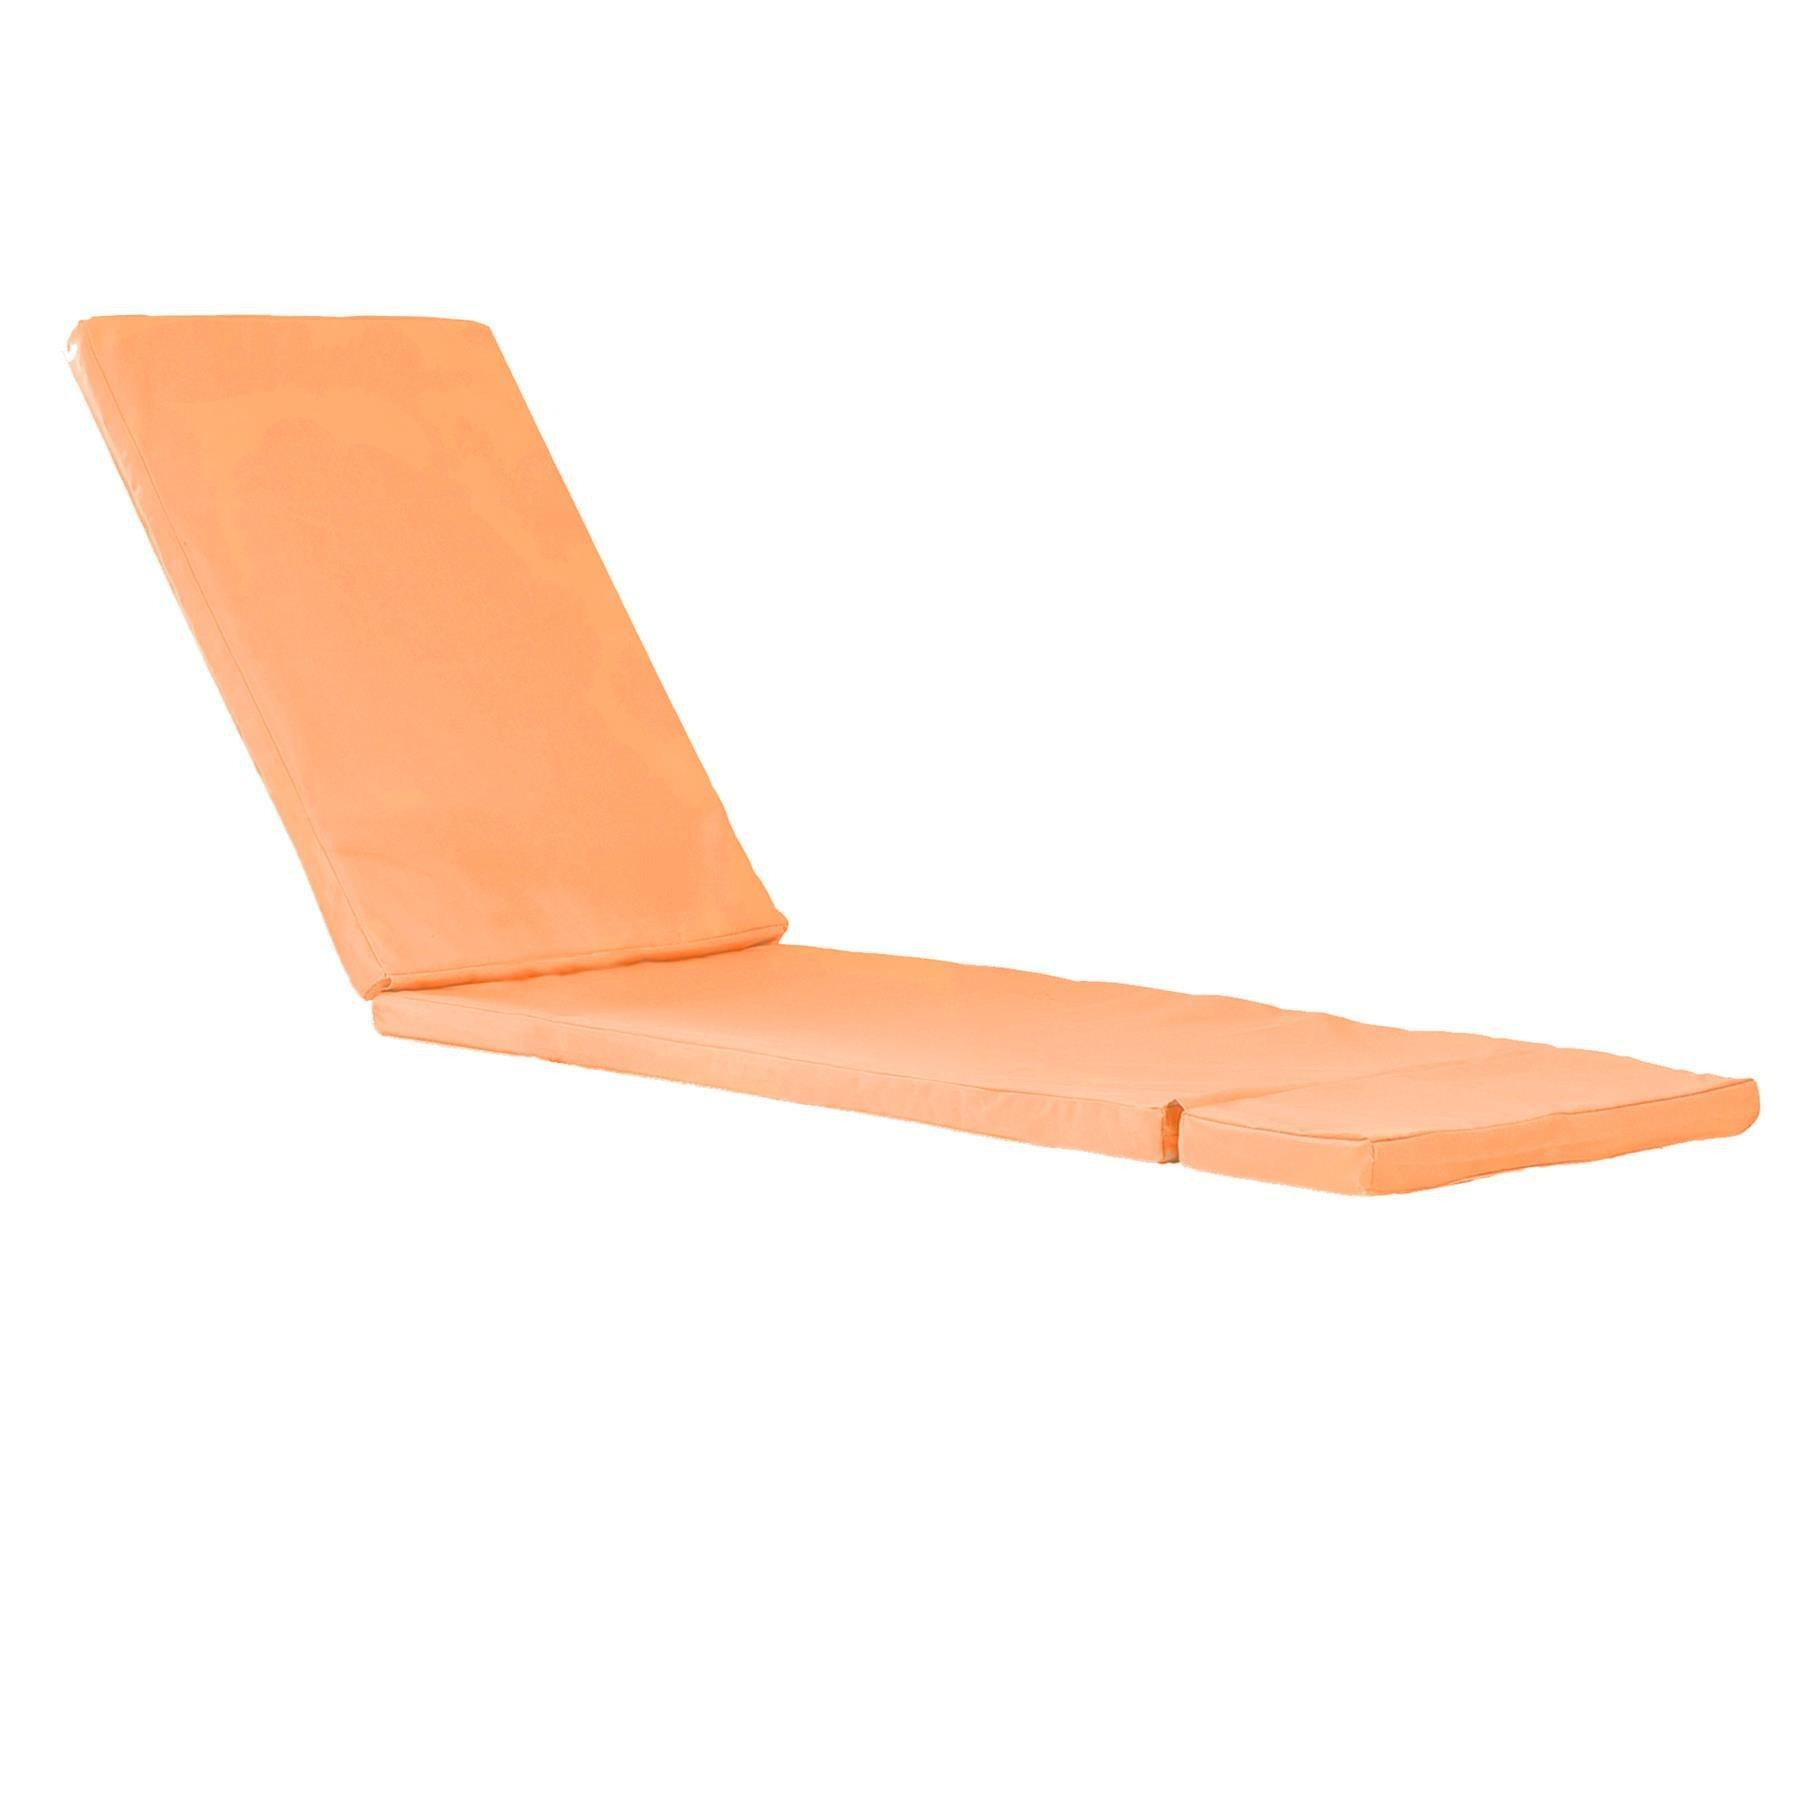 Sussex Sun Lounger Cushion - image 1